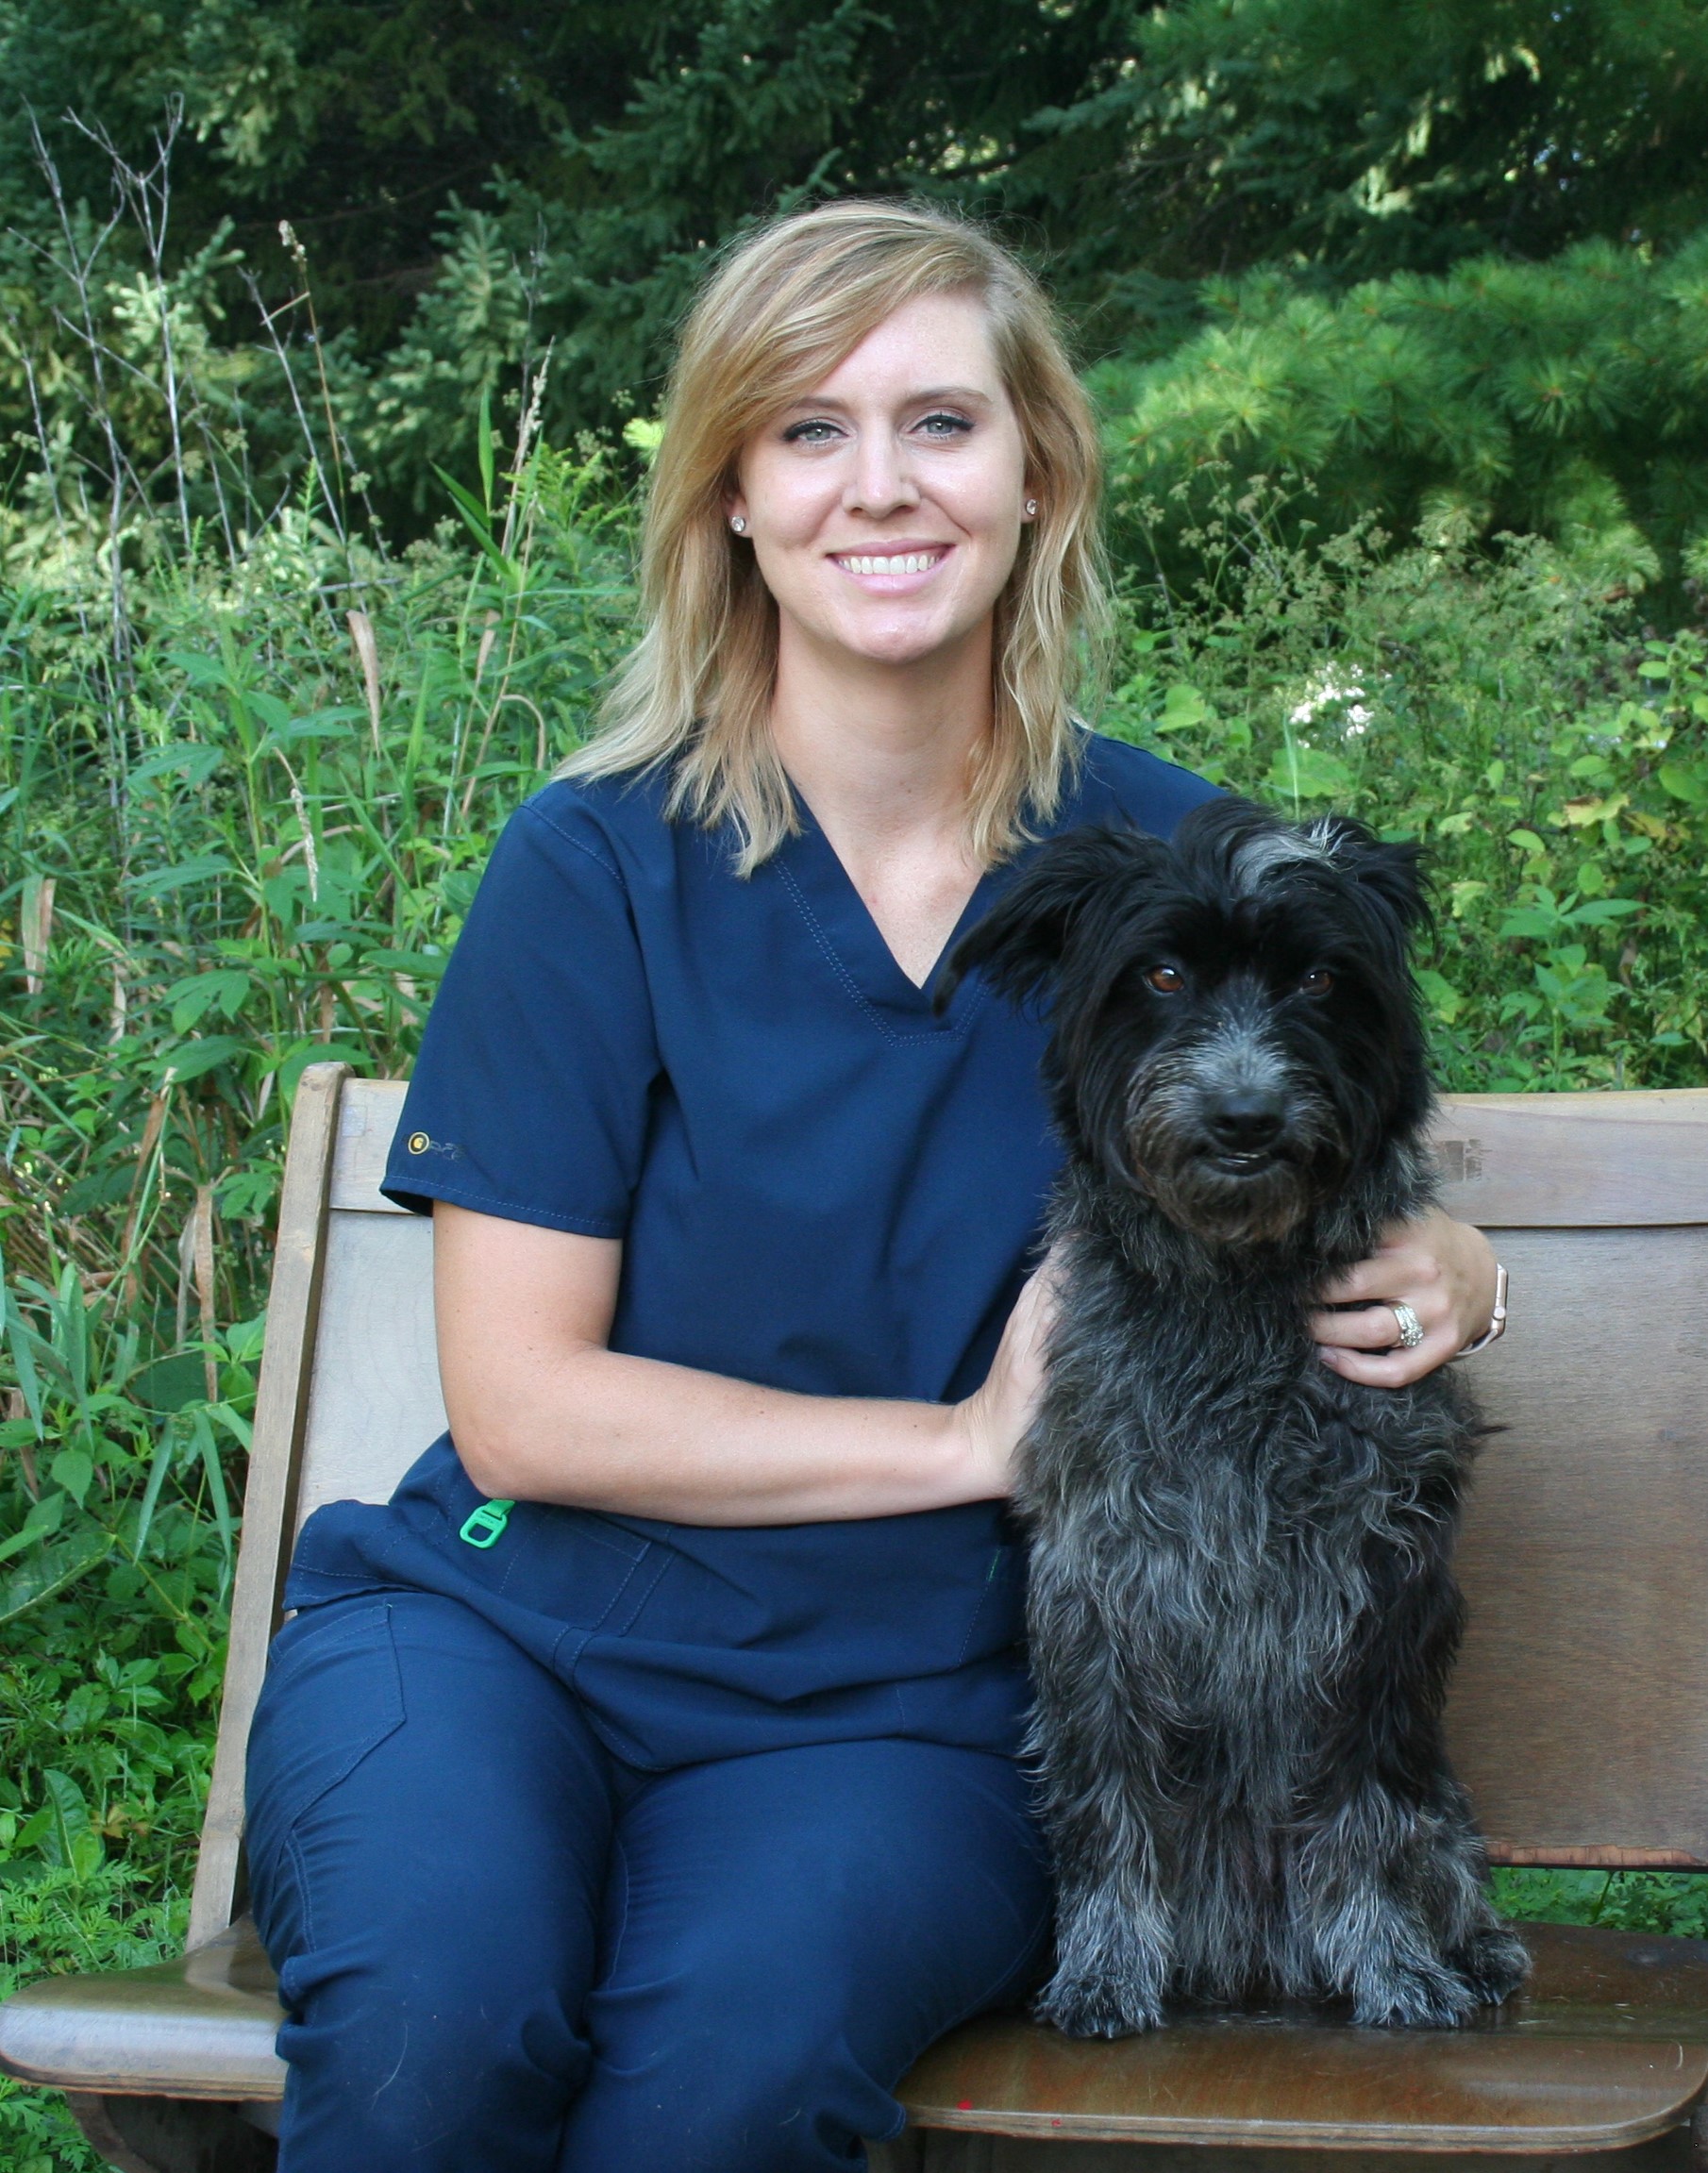 Sunrise Veterinary Services - Reedsburg, WI. | Darci and Piper cropped